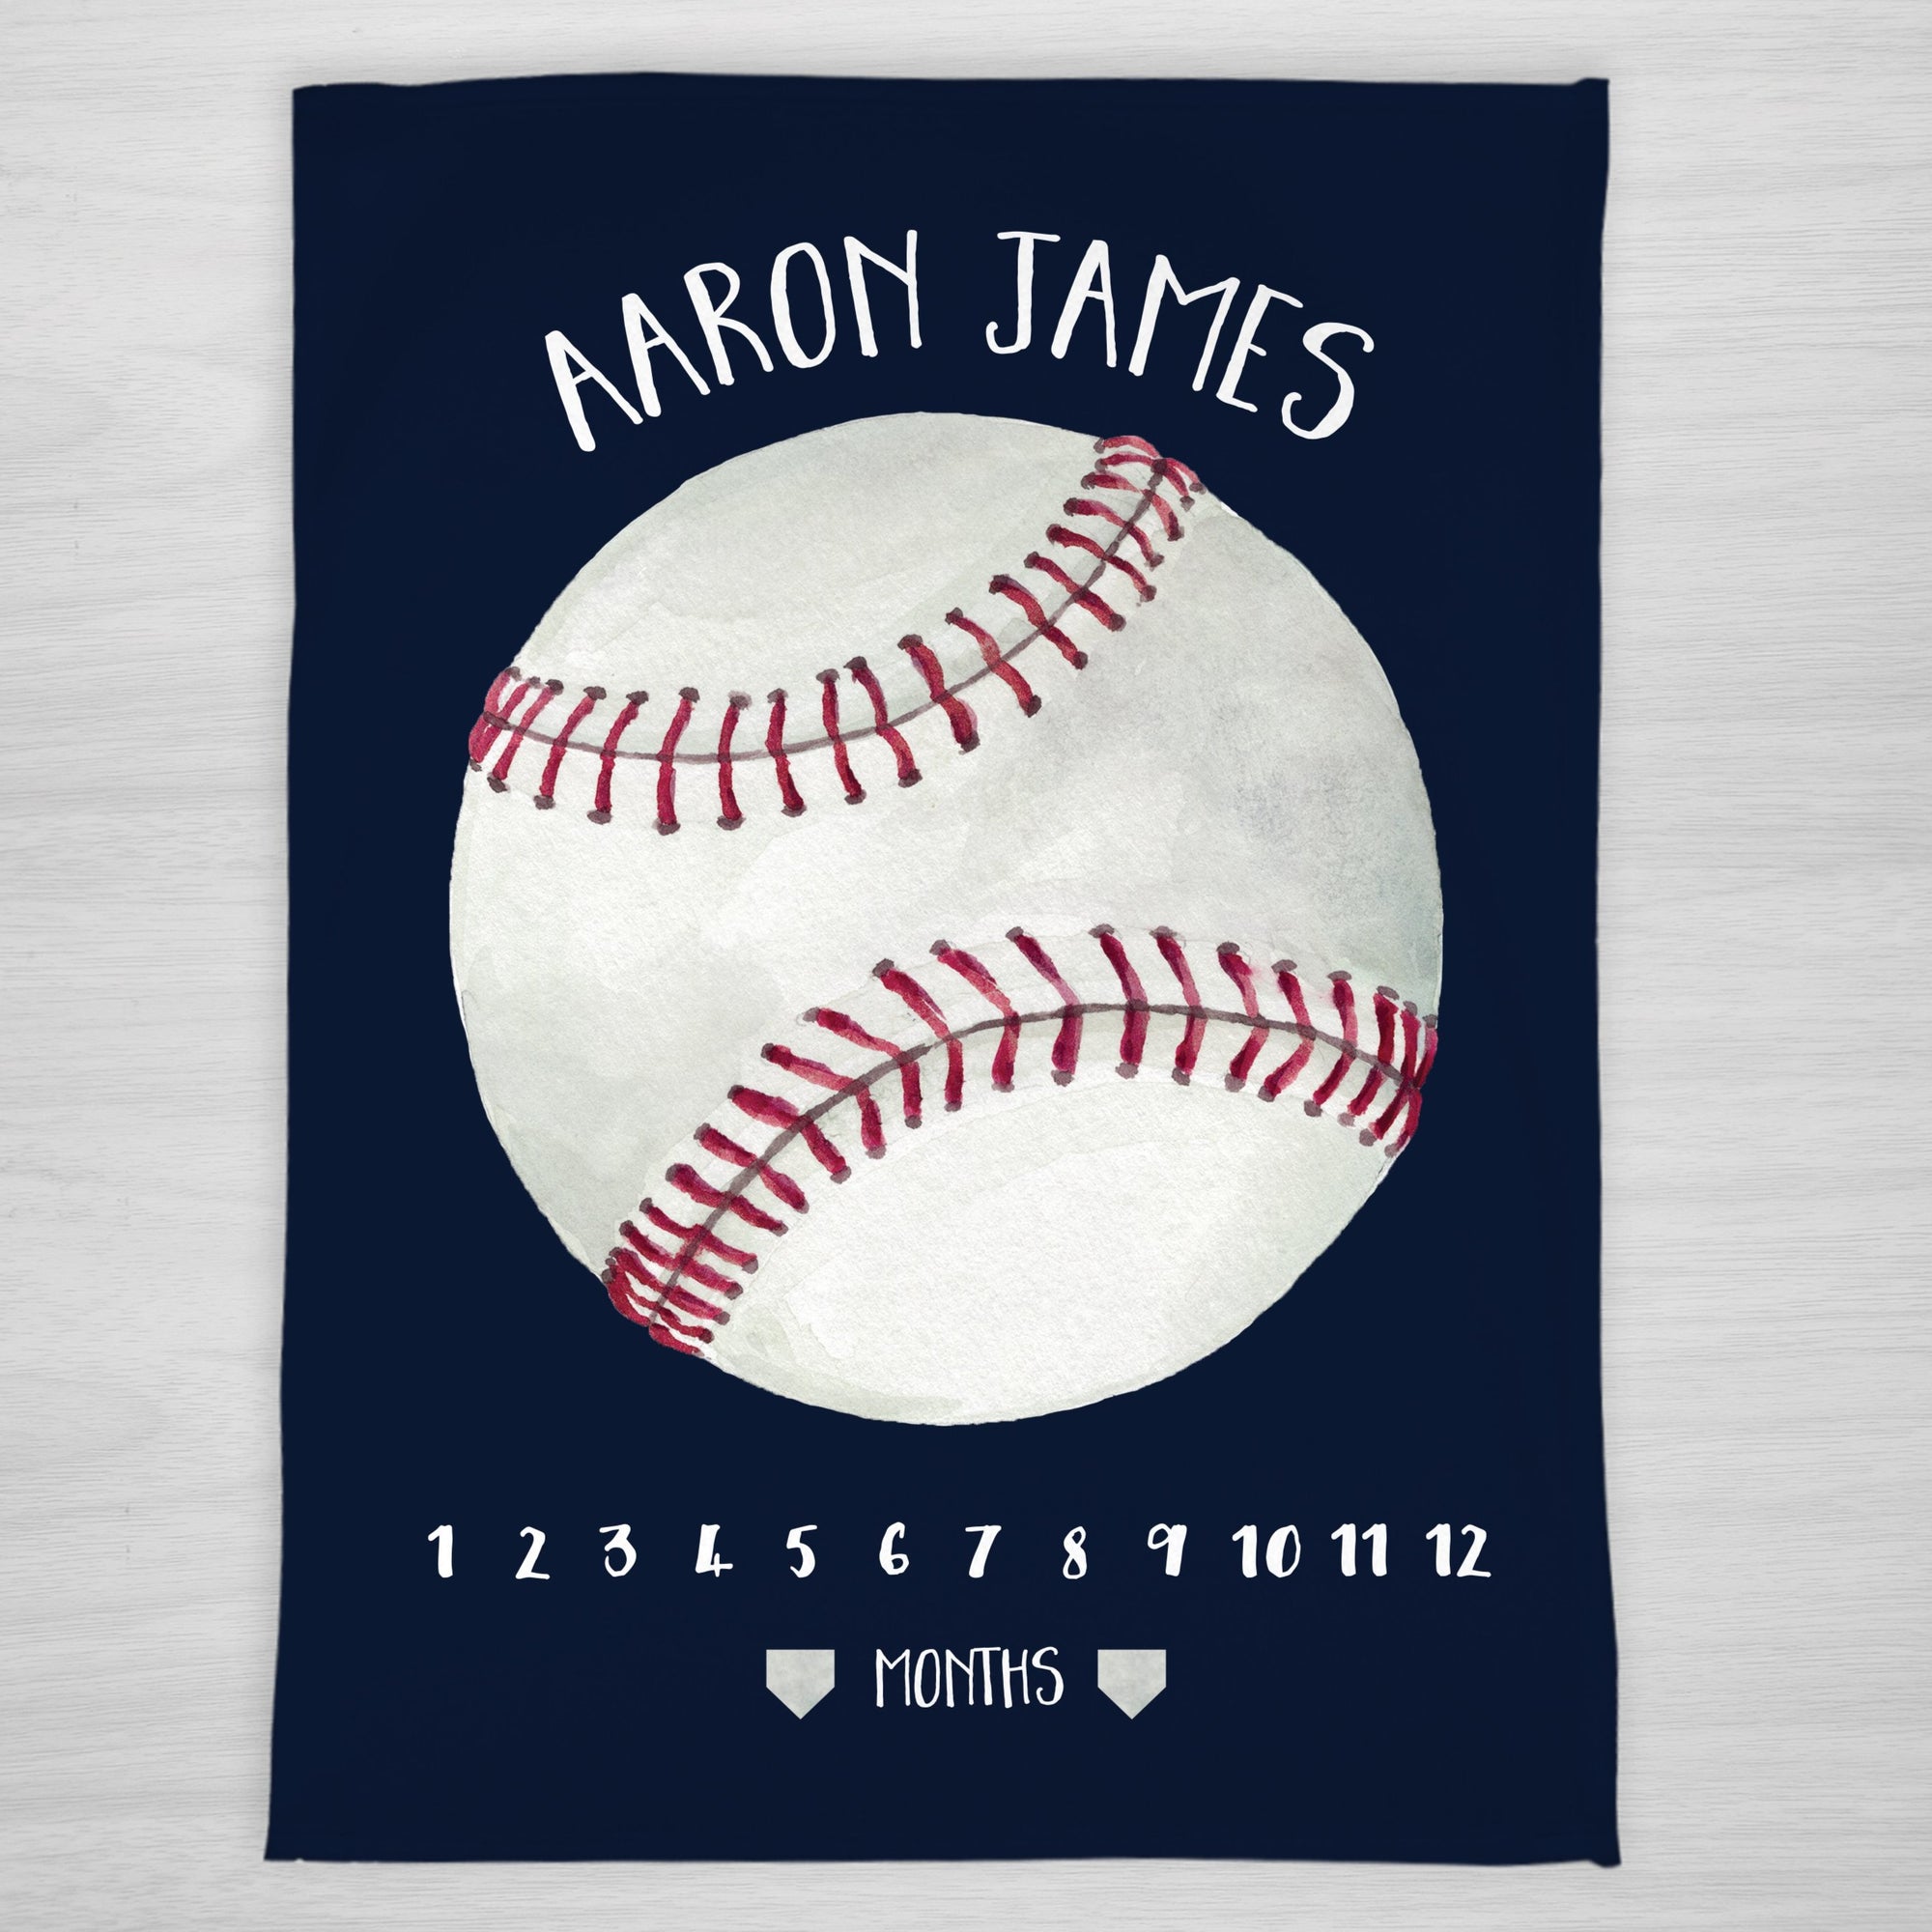 Baseball Milestone Baby Blanket, Personalized and you can choose your background color to match your favorite team